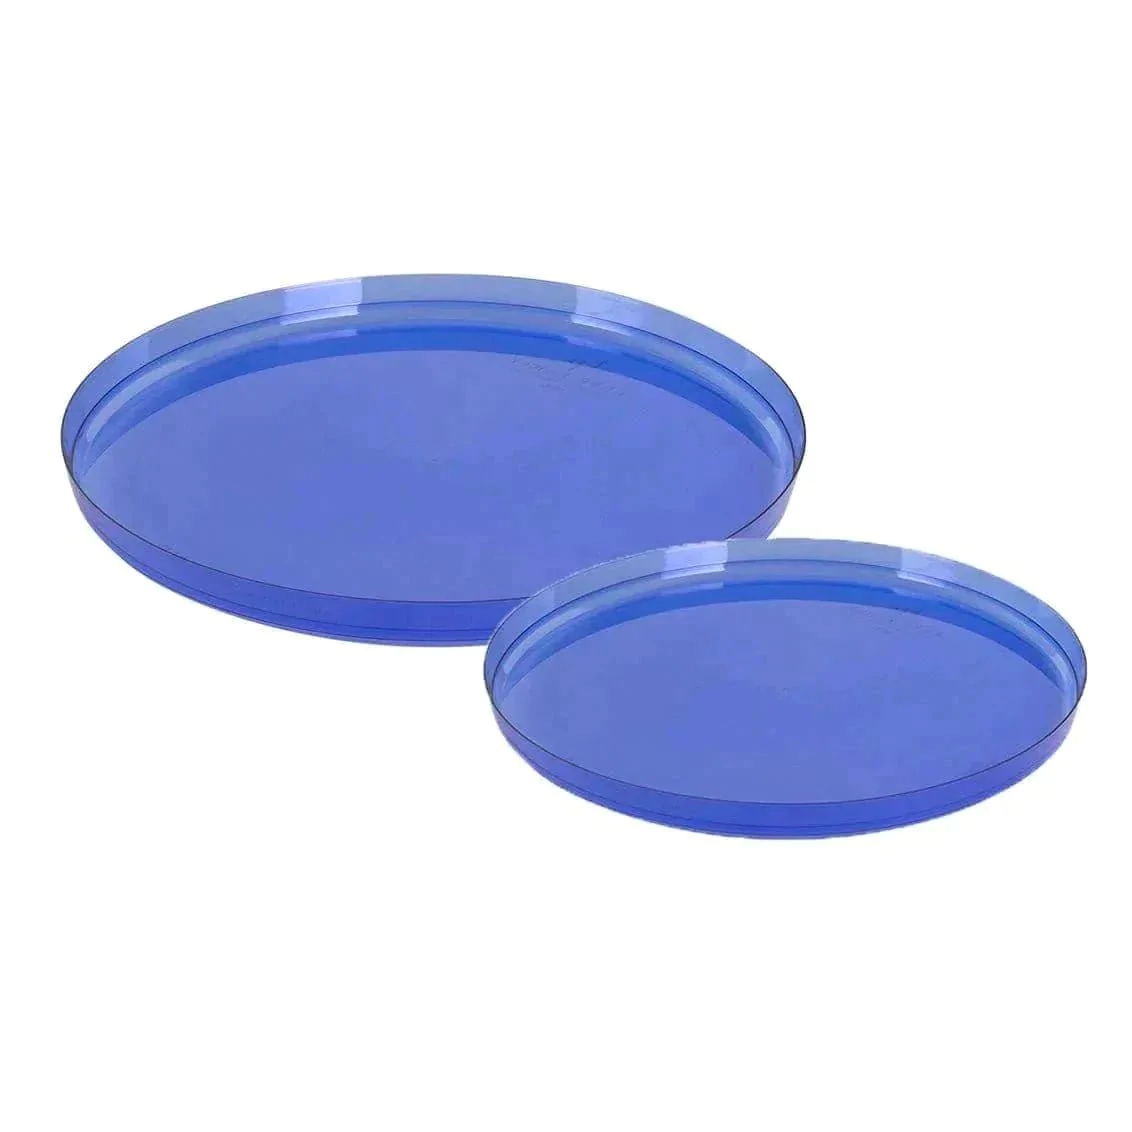 Round Transparent Bartenura Blue Walled Plastic Plates | 10 Pack - Set With Style